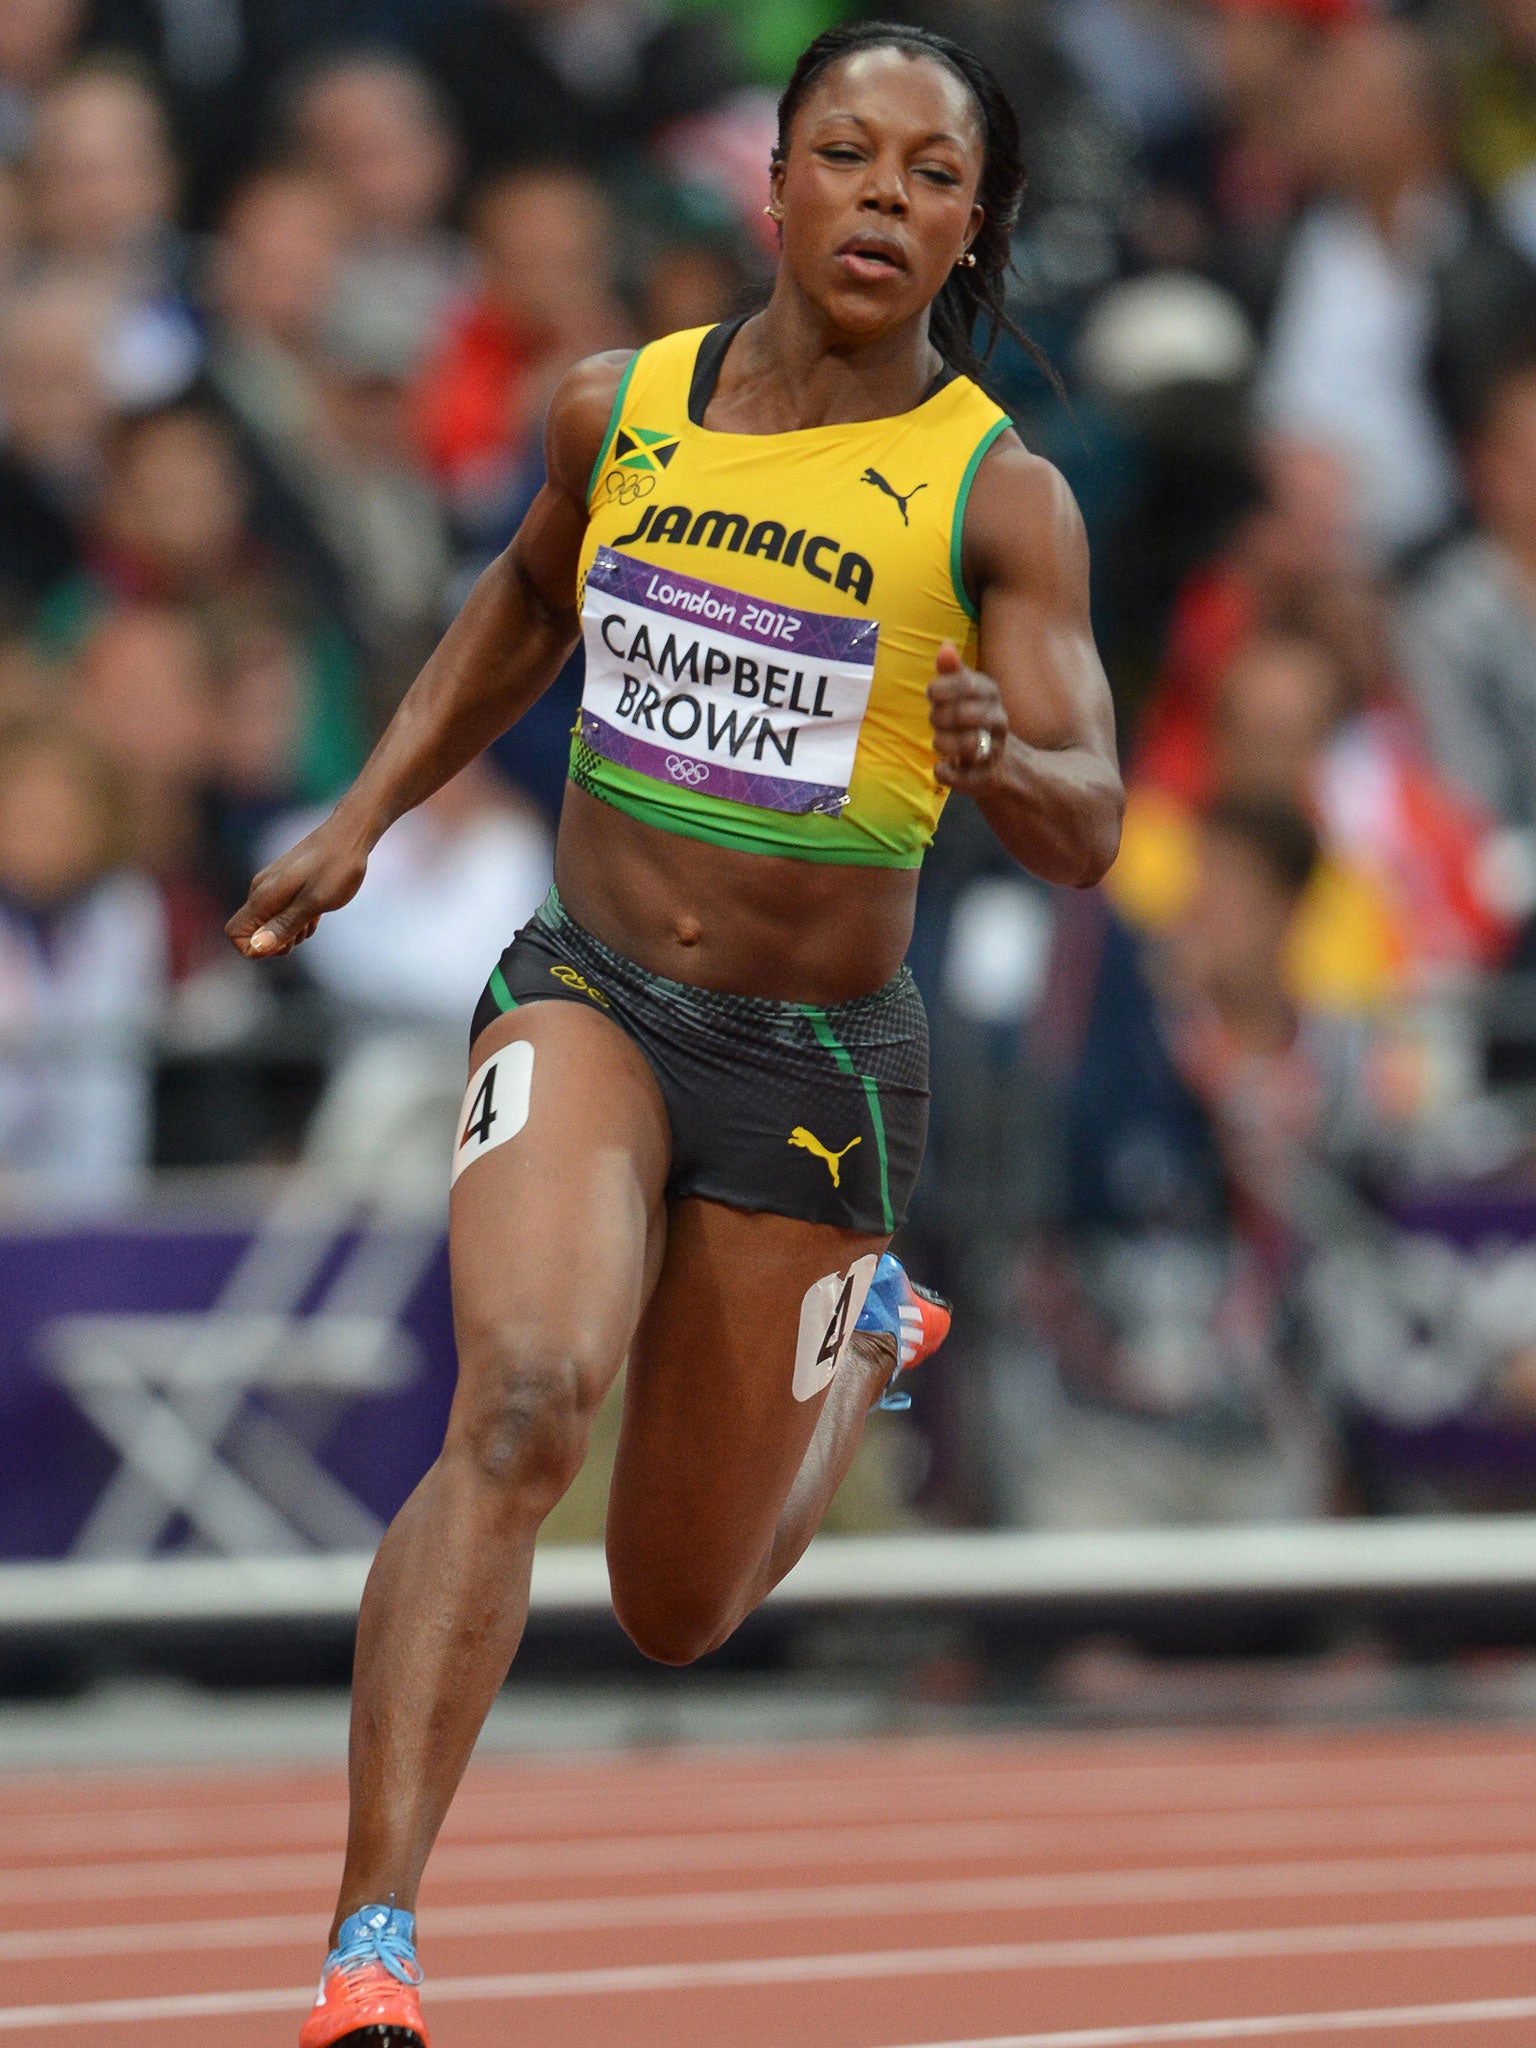 Jamaican Sprinter Veronica Campbell Brown Let Off Drug Ban The 